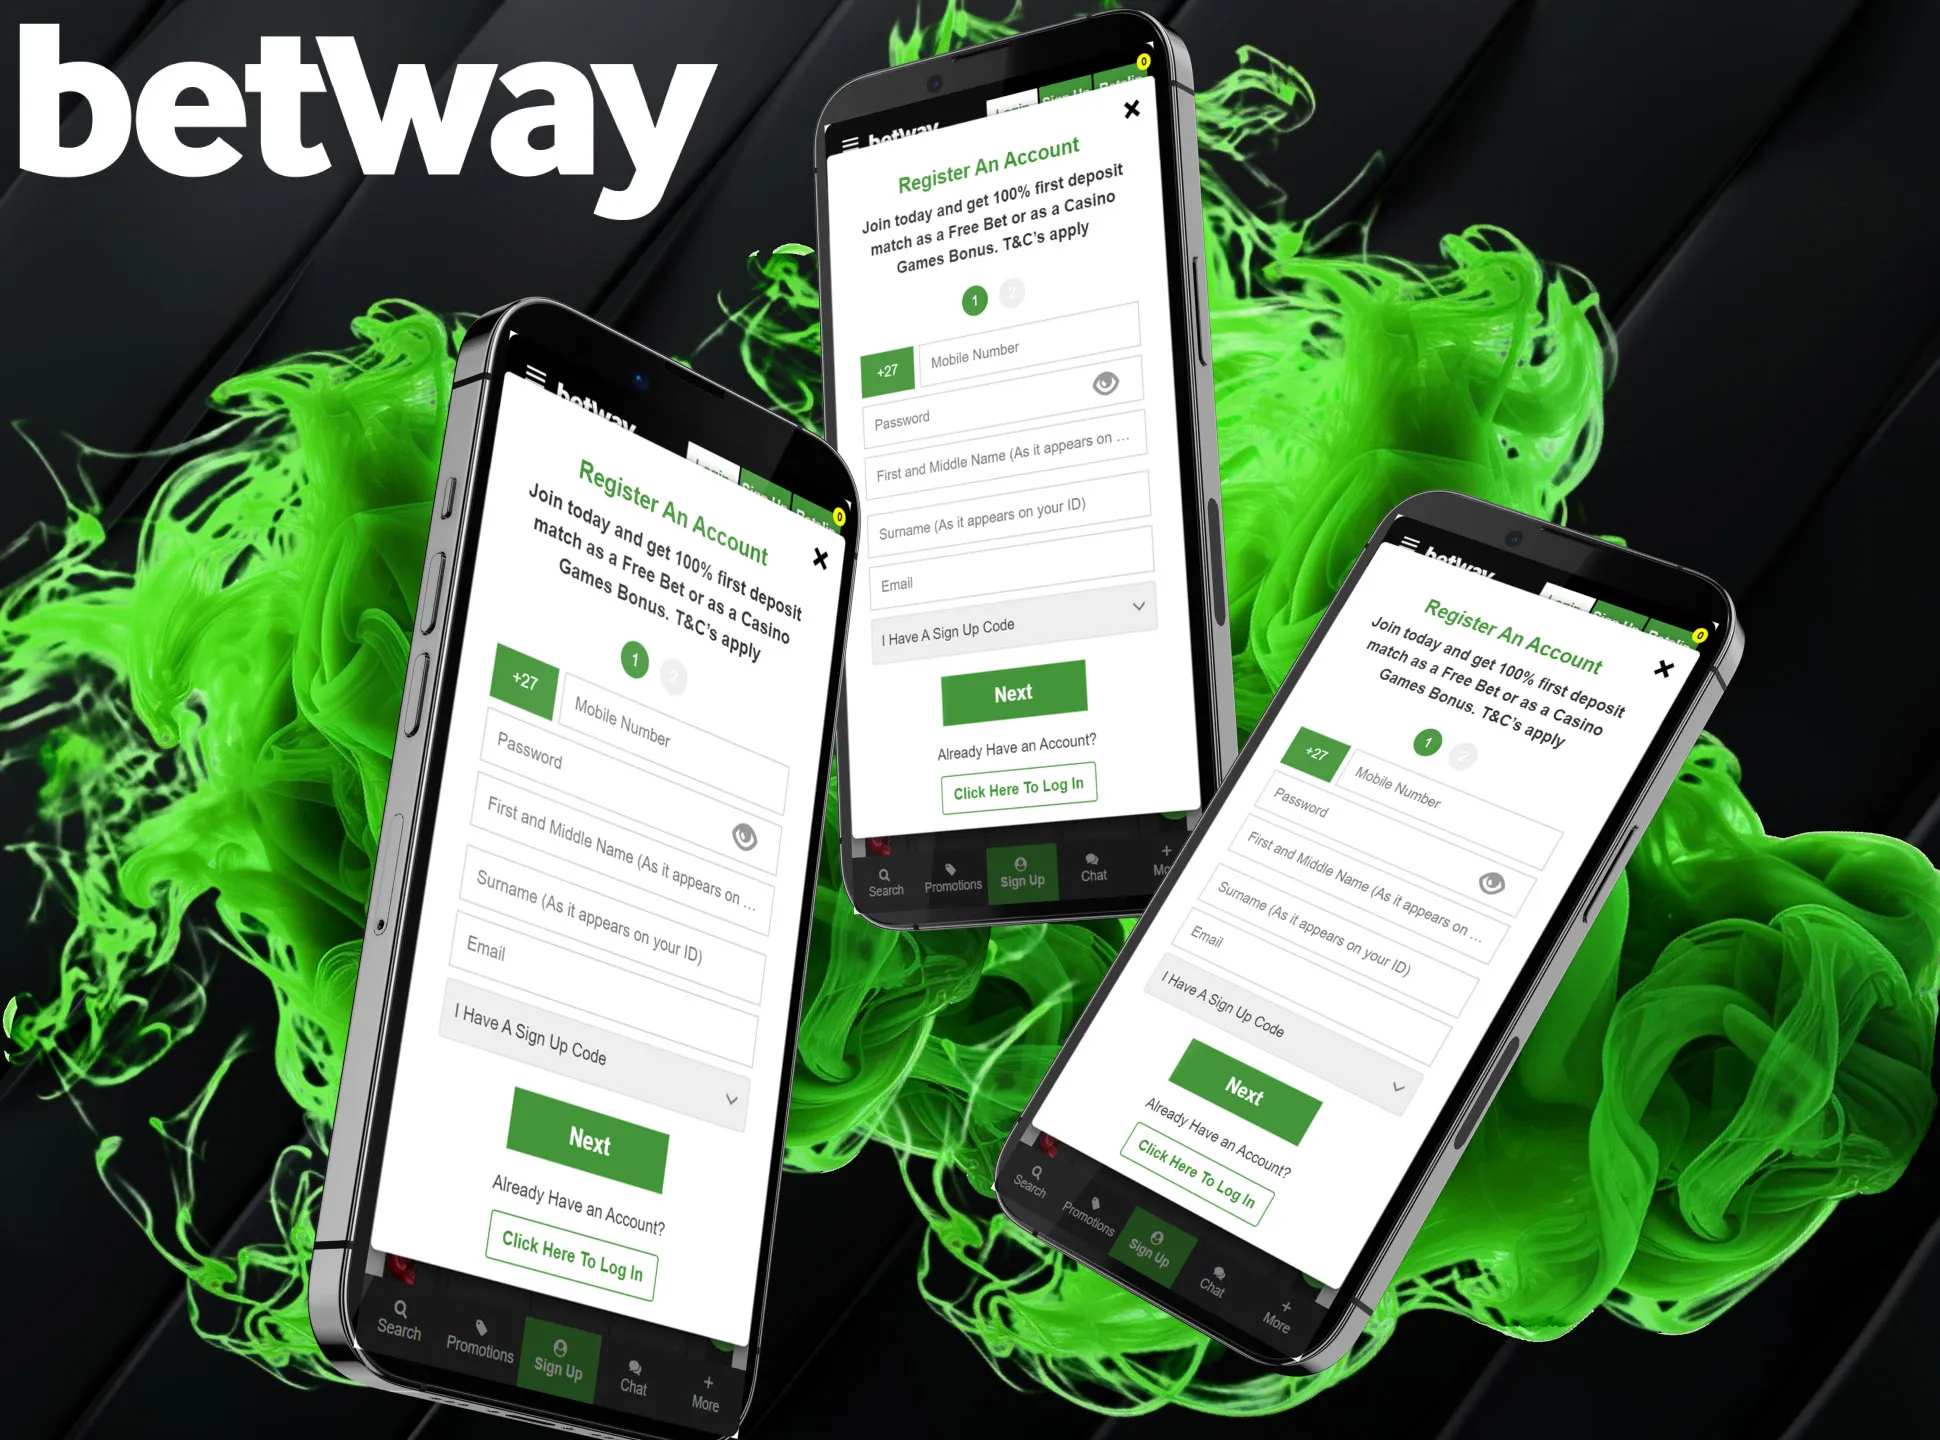 Download the Betway mobile app and creare your account there.